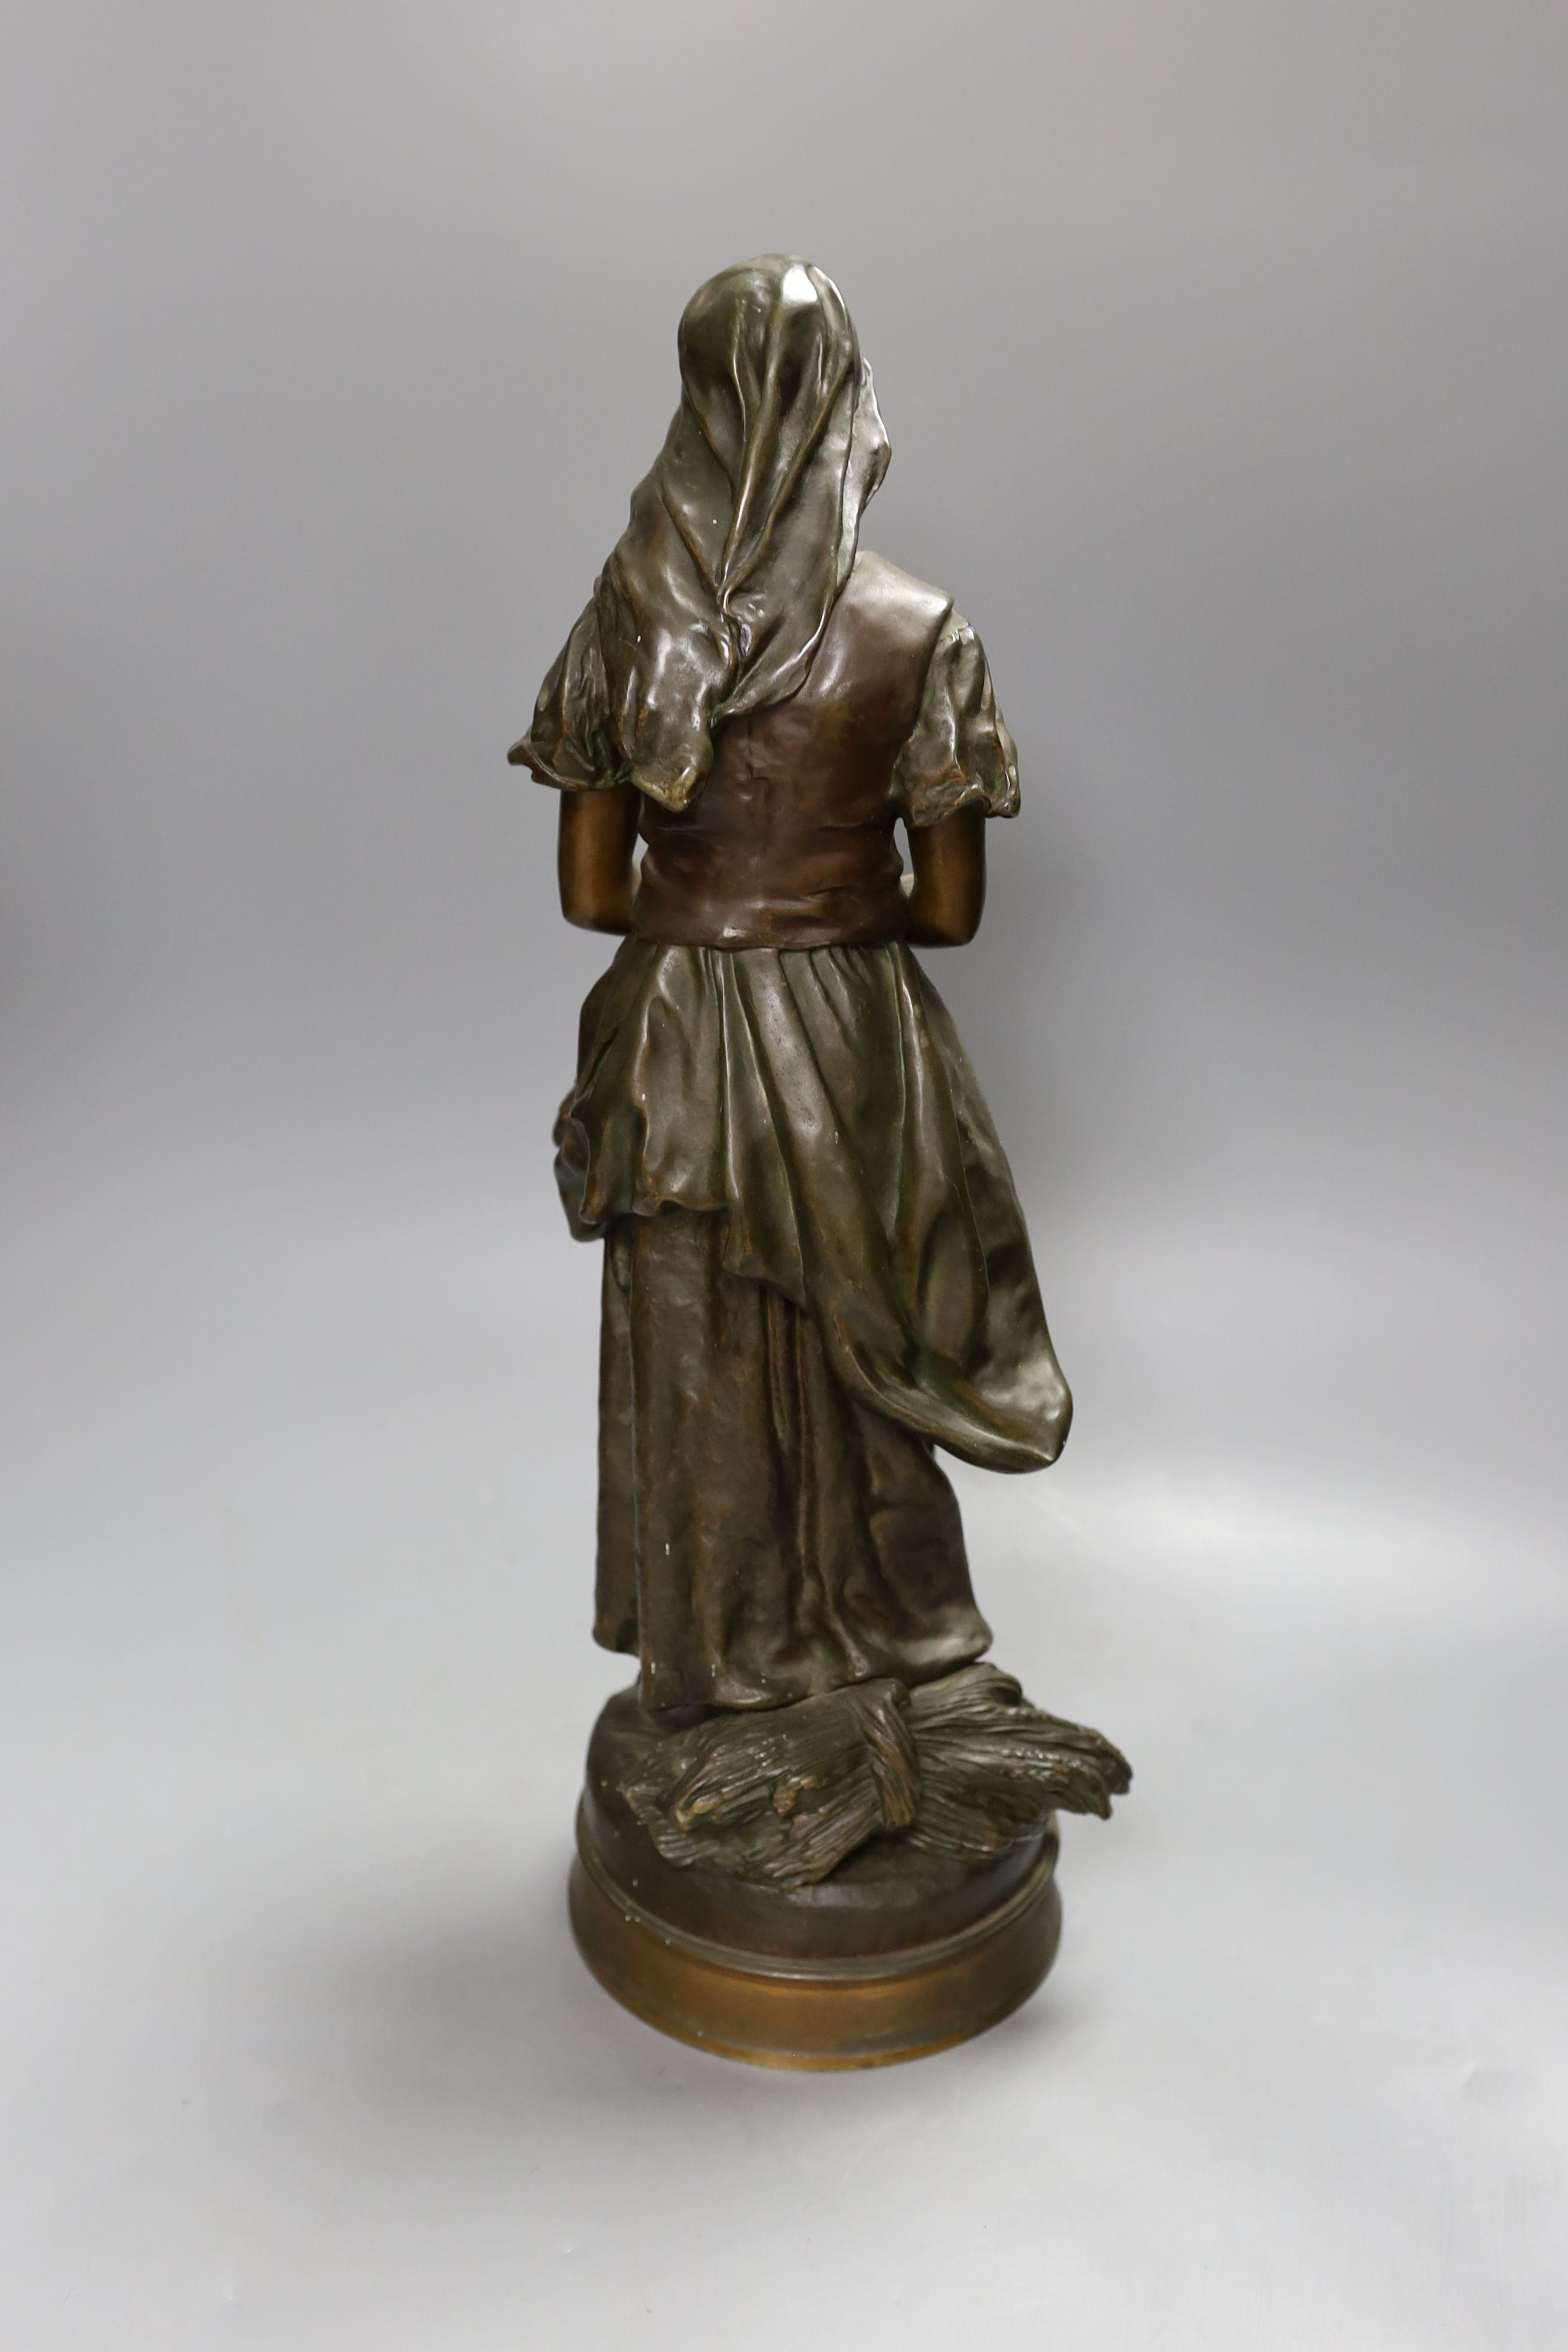 Emile Edmond Peynot (1850-1932), bronze of a girl with flowers in her apron 46cm